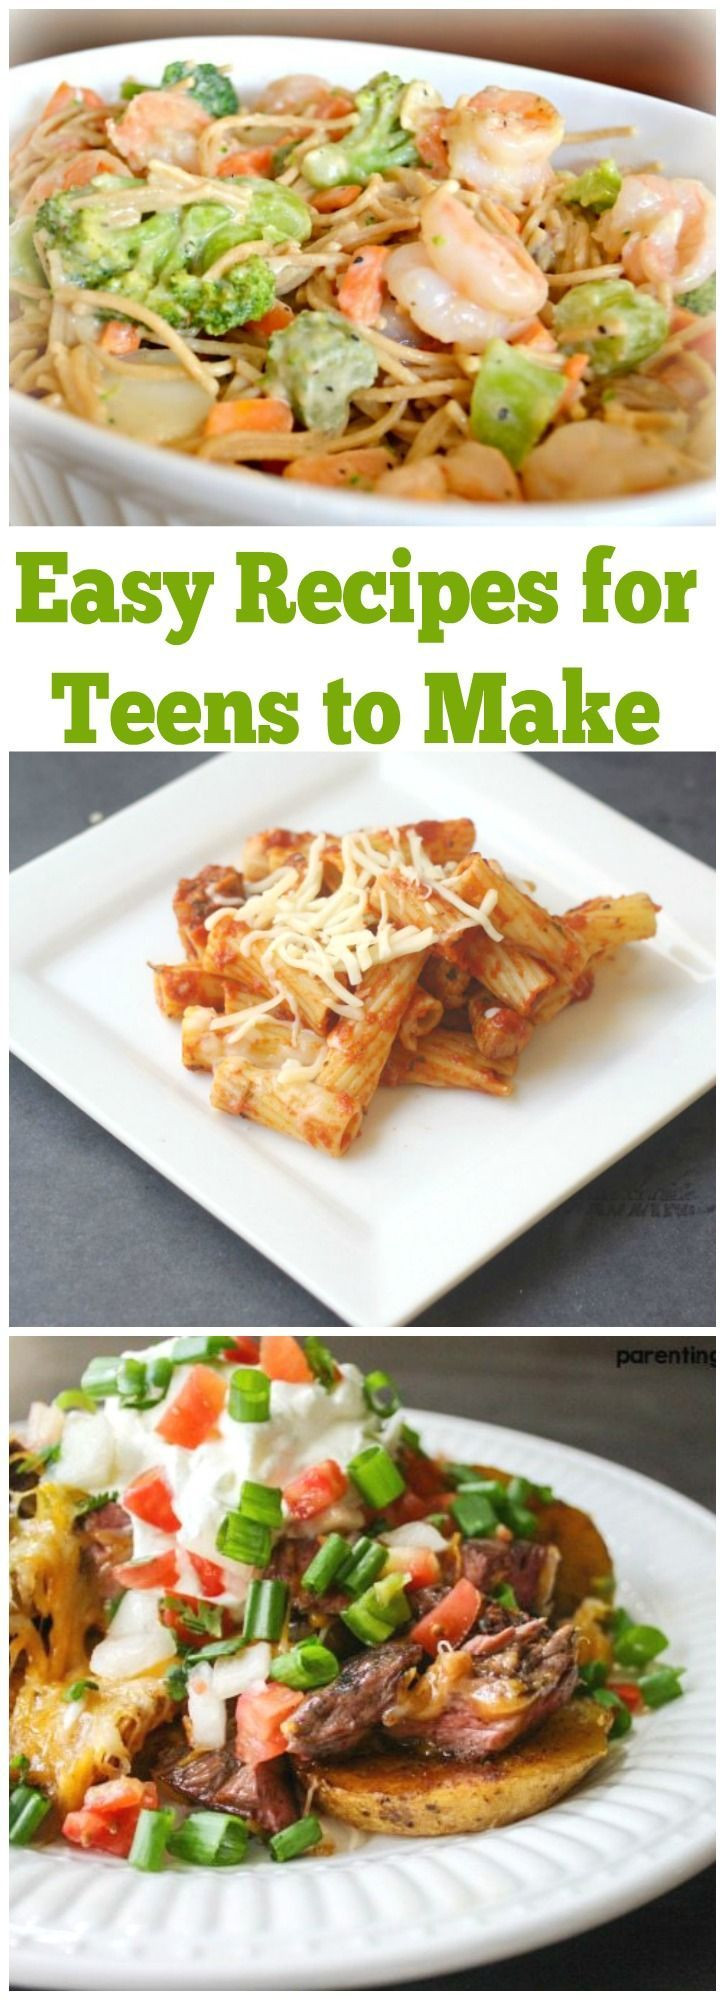 Teenage Dinner Party Ideas
 816 best images about Teen Crafts Fun & Recipes on